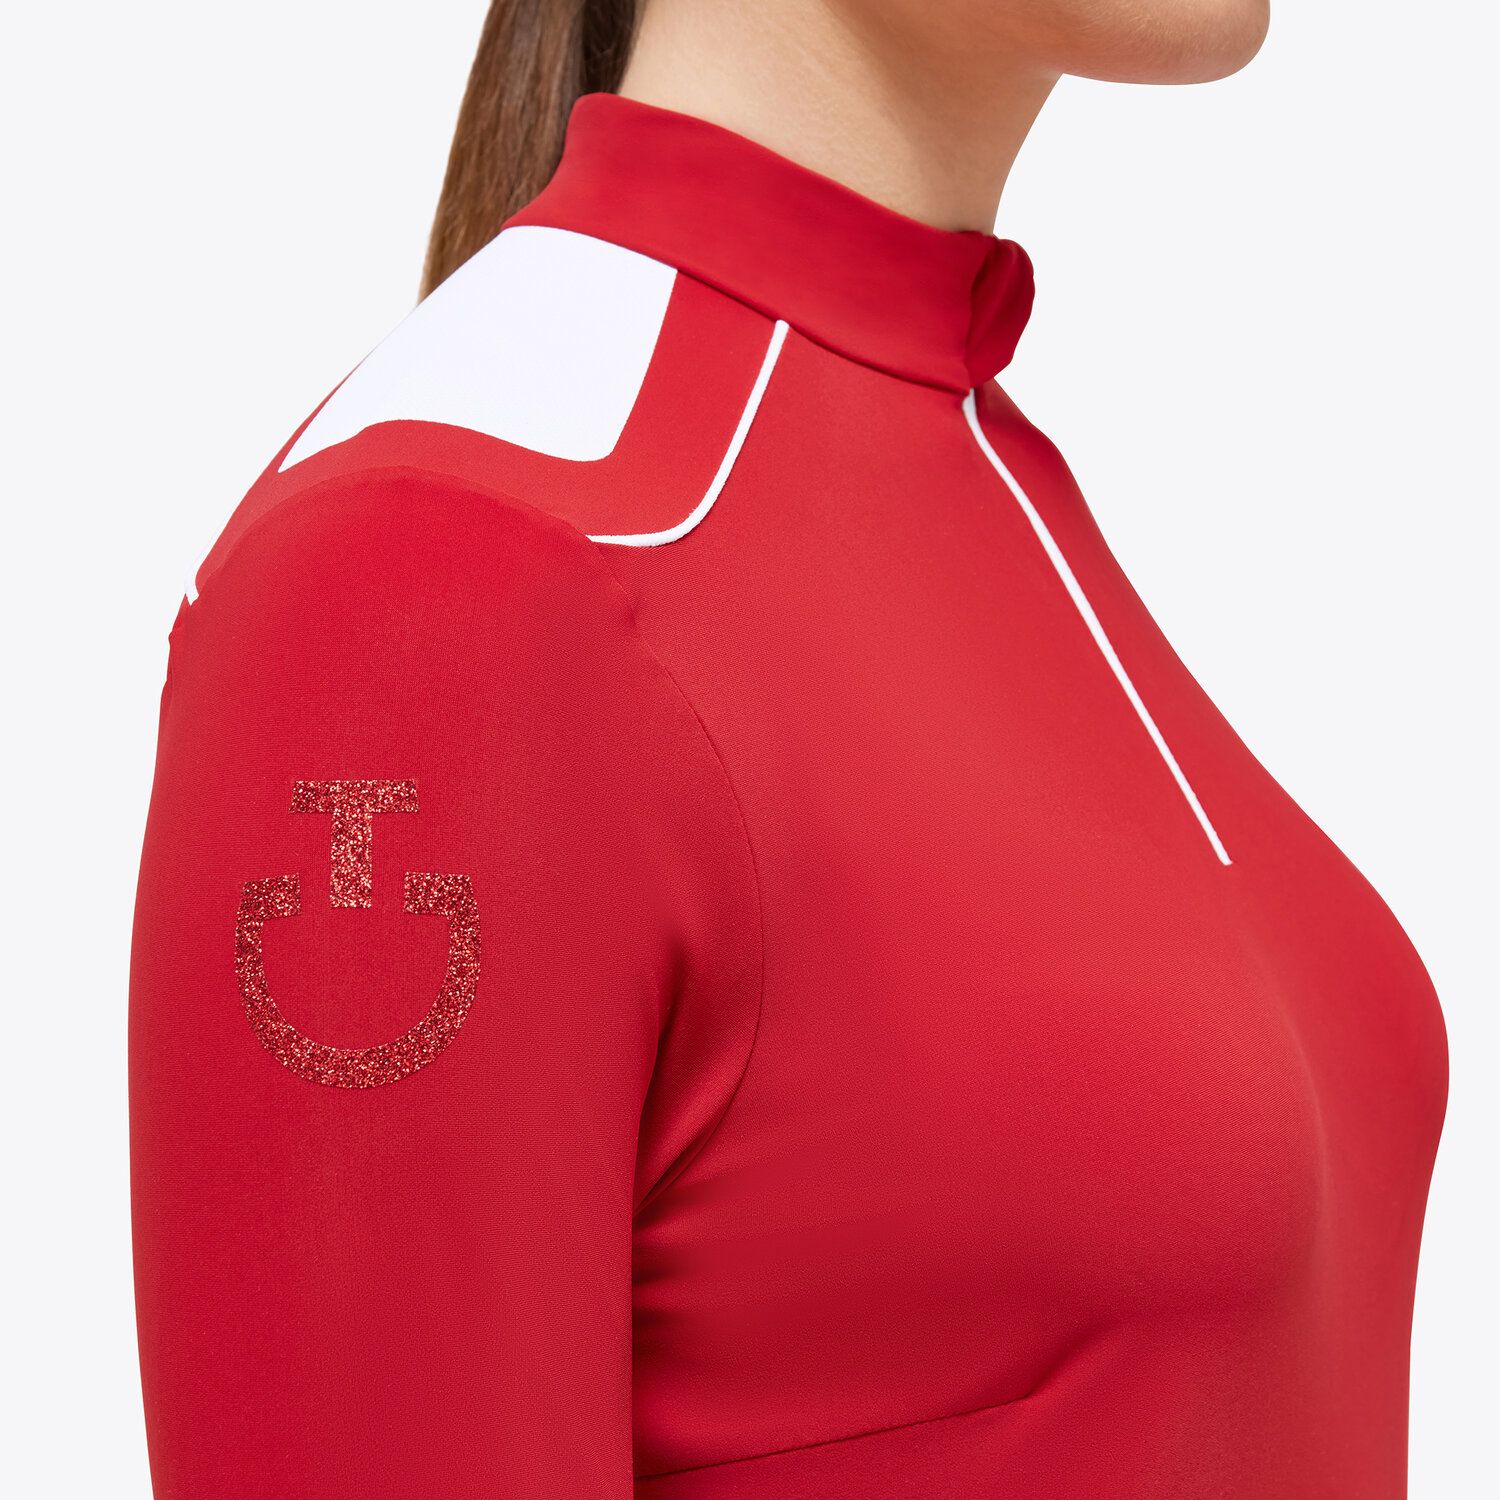 Woman's Red Polo Shirt